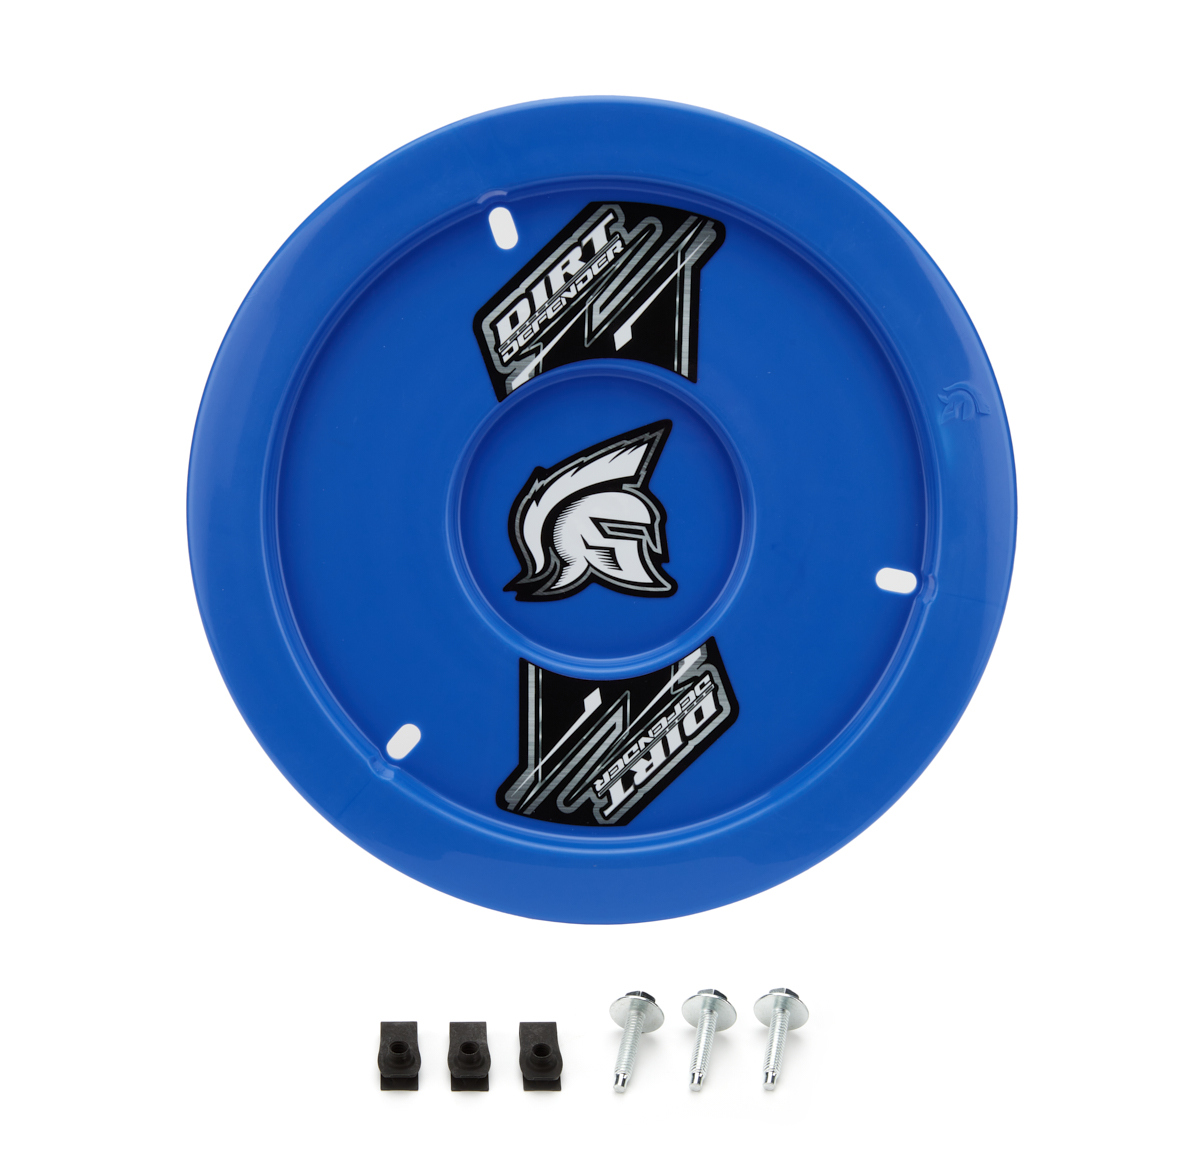 Dirt Defender 10020-2 Mud Cover, Gen II, Bolt-On, Hardware Included, Cover Only, Plastic, Dark Blue, 15 in Wheels, Each